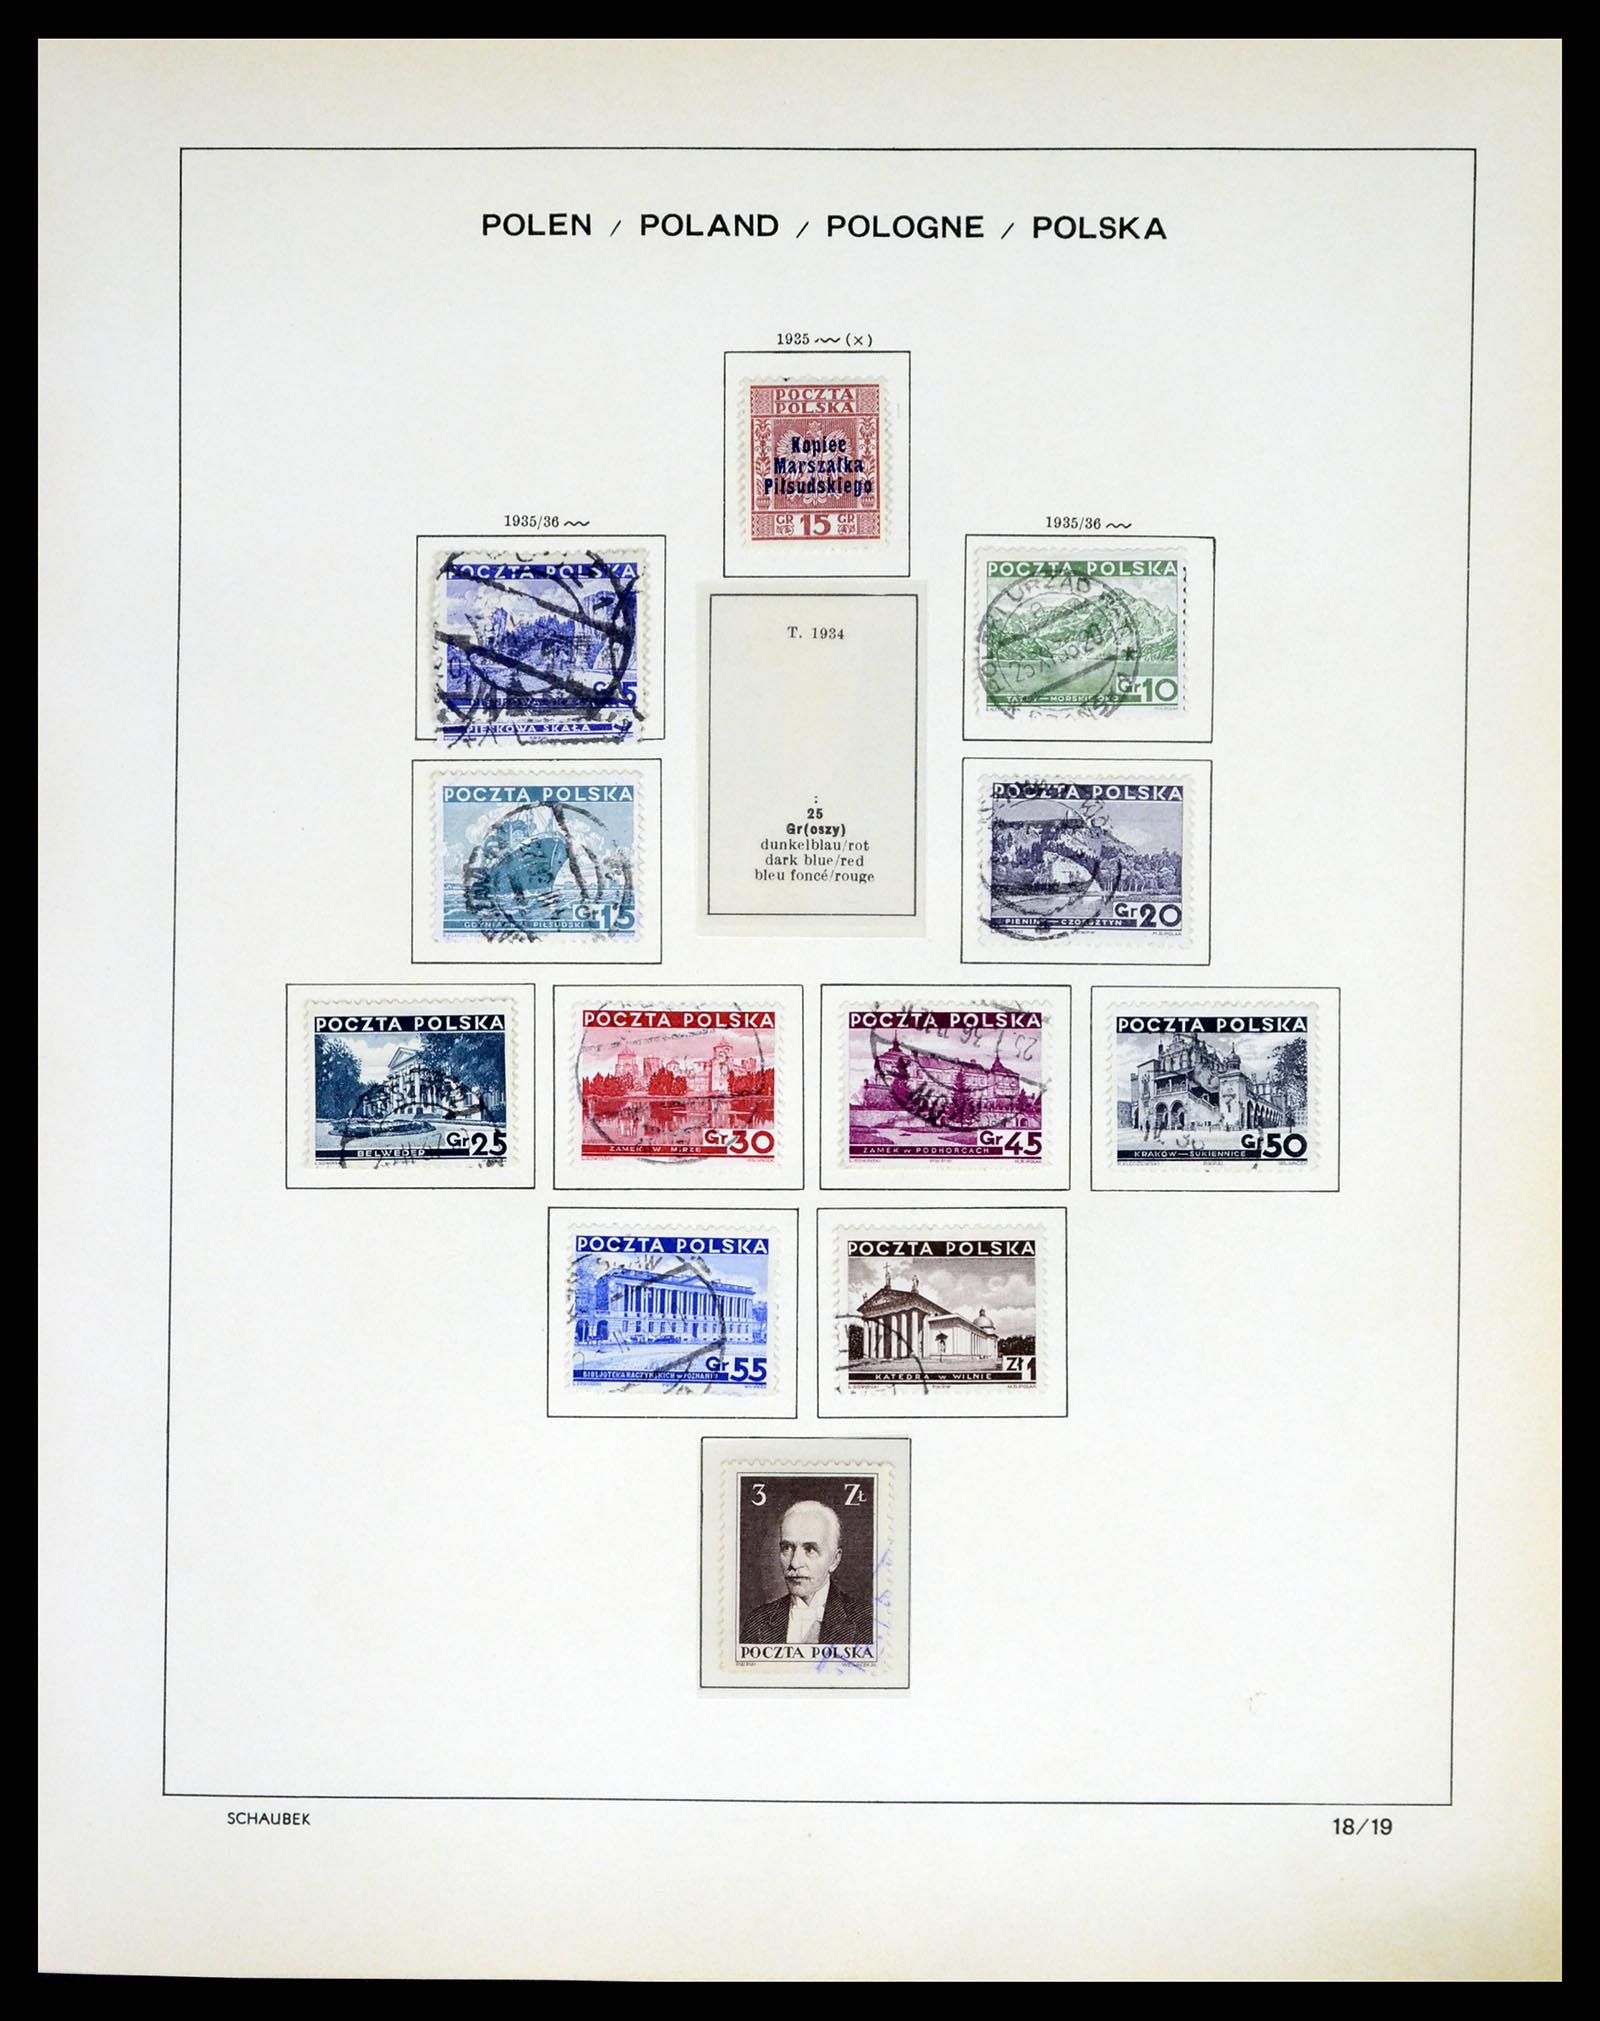 37335 032 - Stamp collection 37335 Poland 1918-1965.